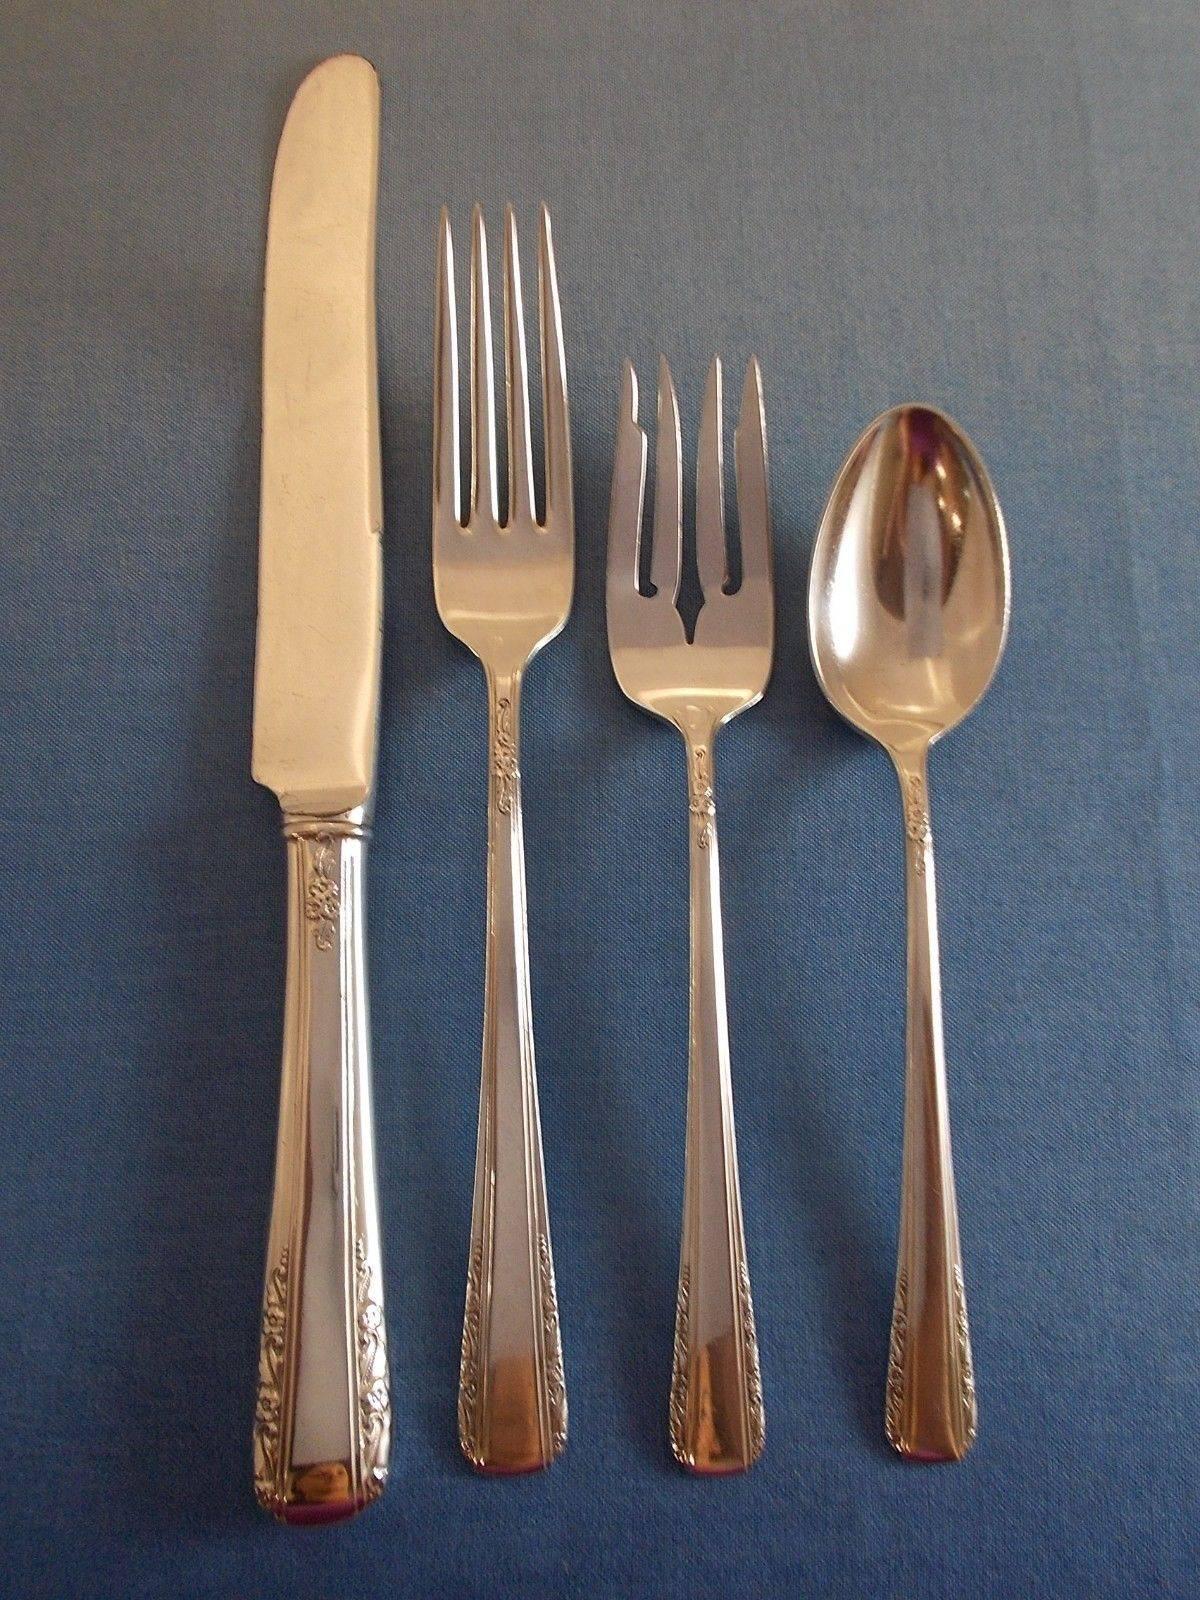 Courtship by international sterling silver flatware set of 35 pieces. This set includes: 
8 KNIVES, 9 1/8